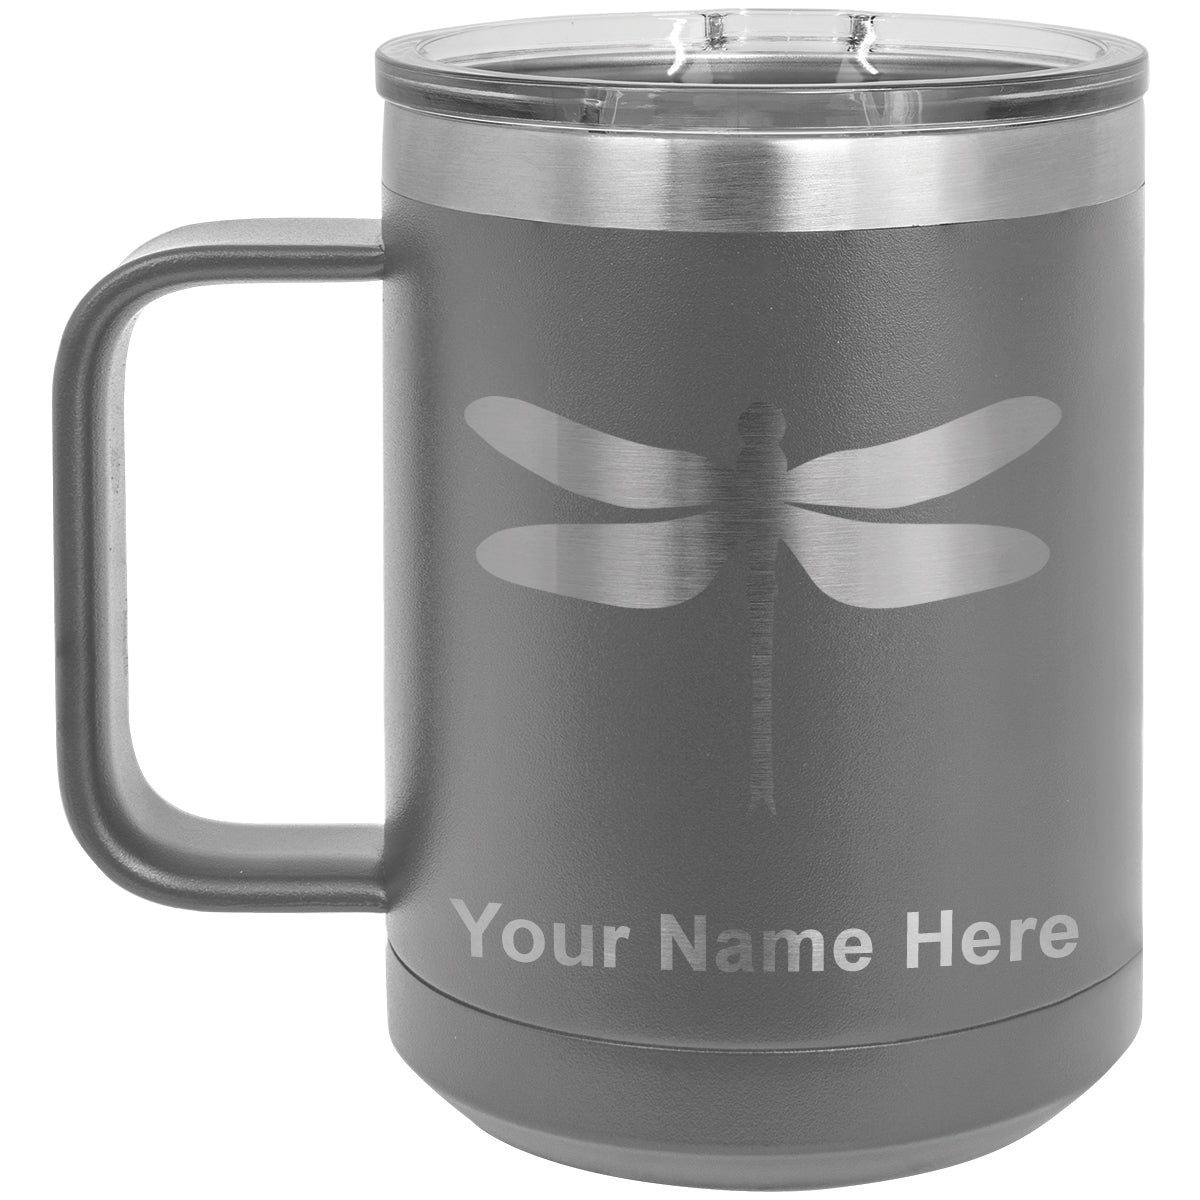 15oz Vacuum Insulated Coffee Mug, Dragonfly, Personalized Engraving Included